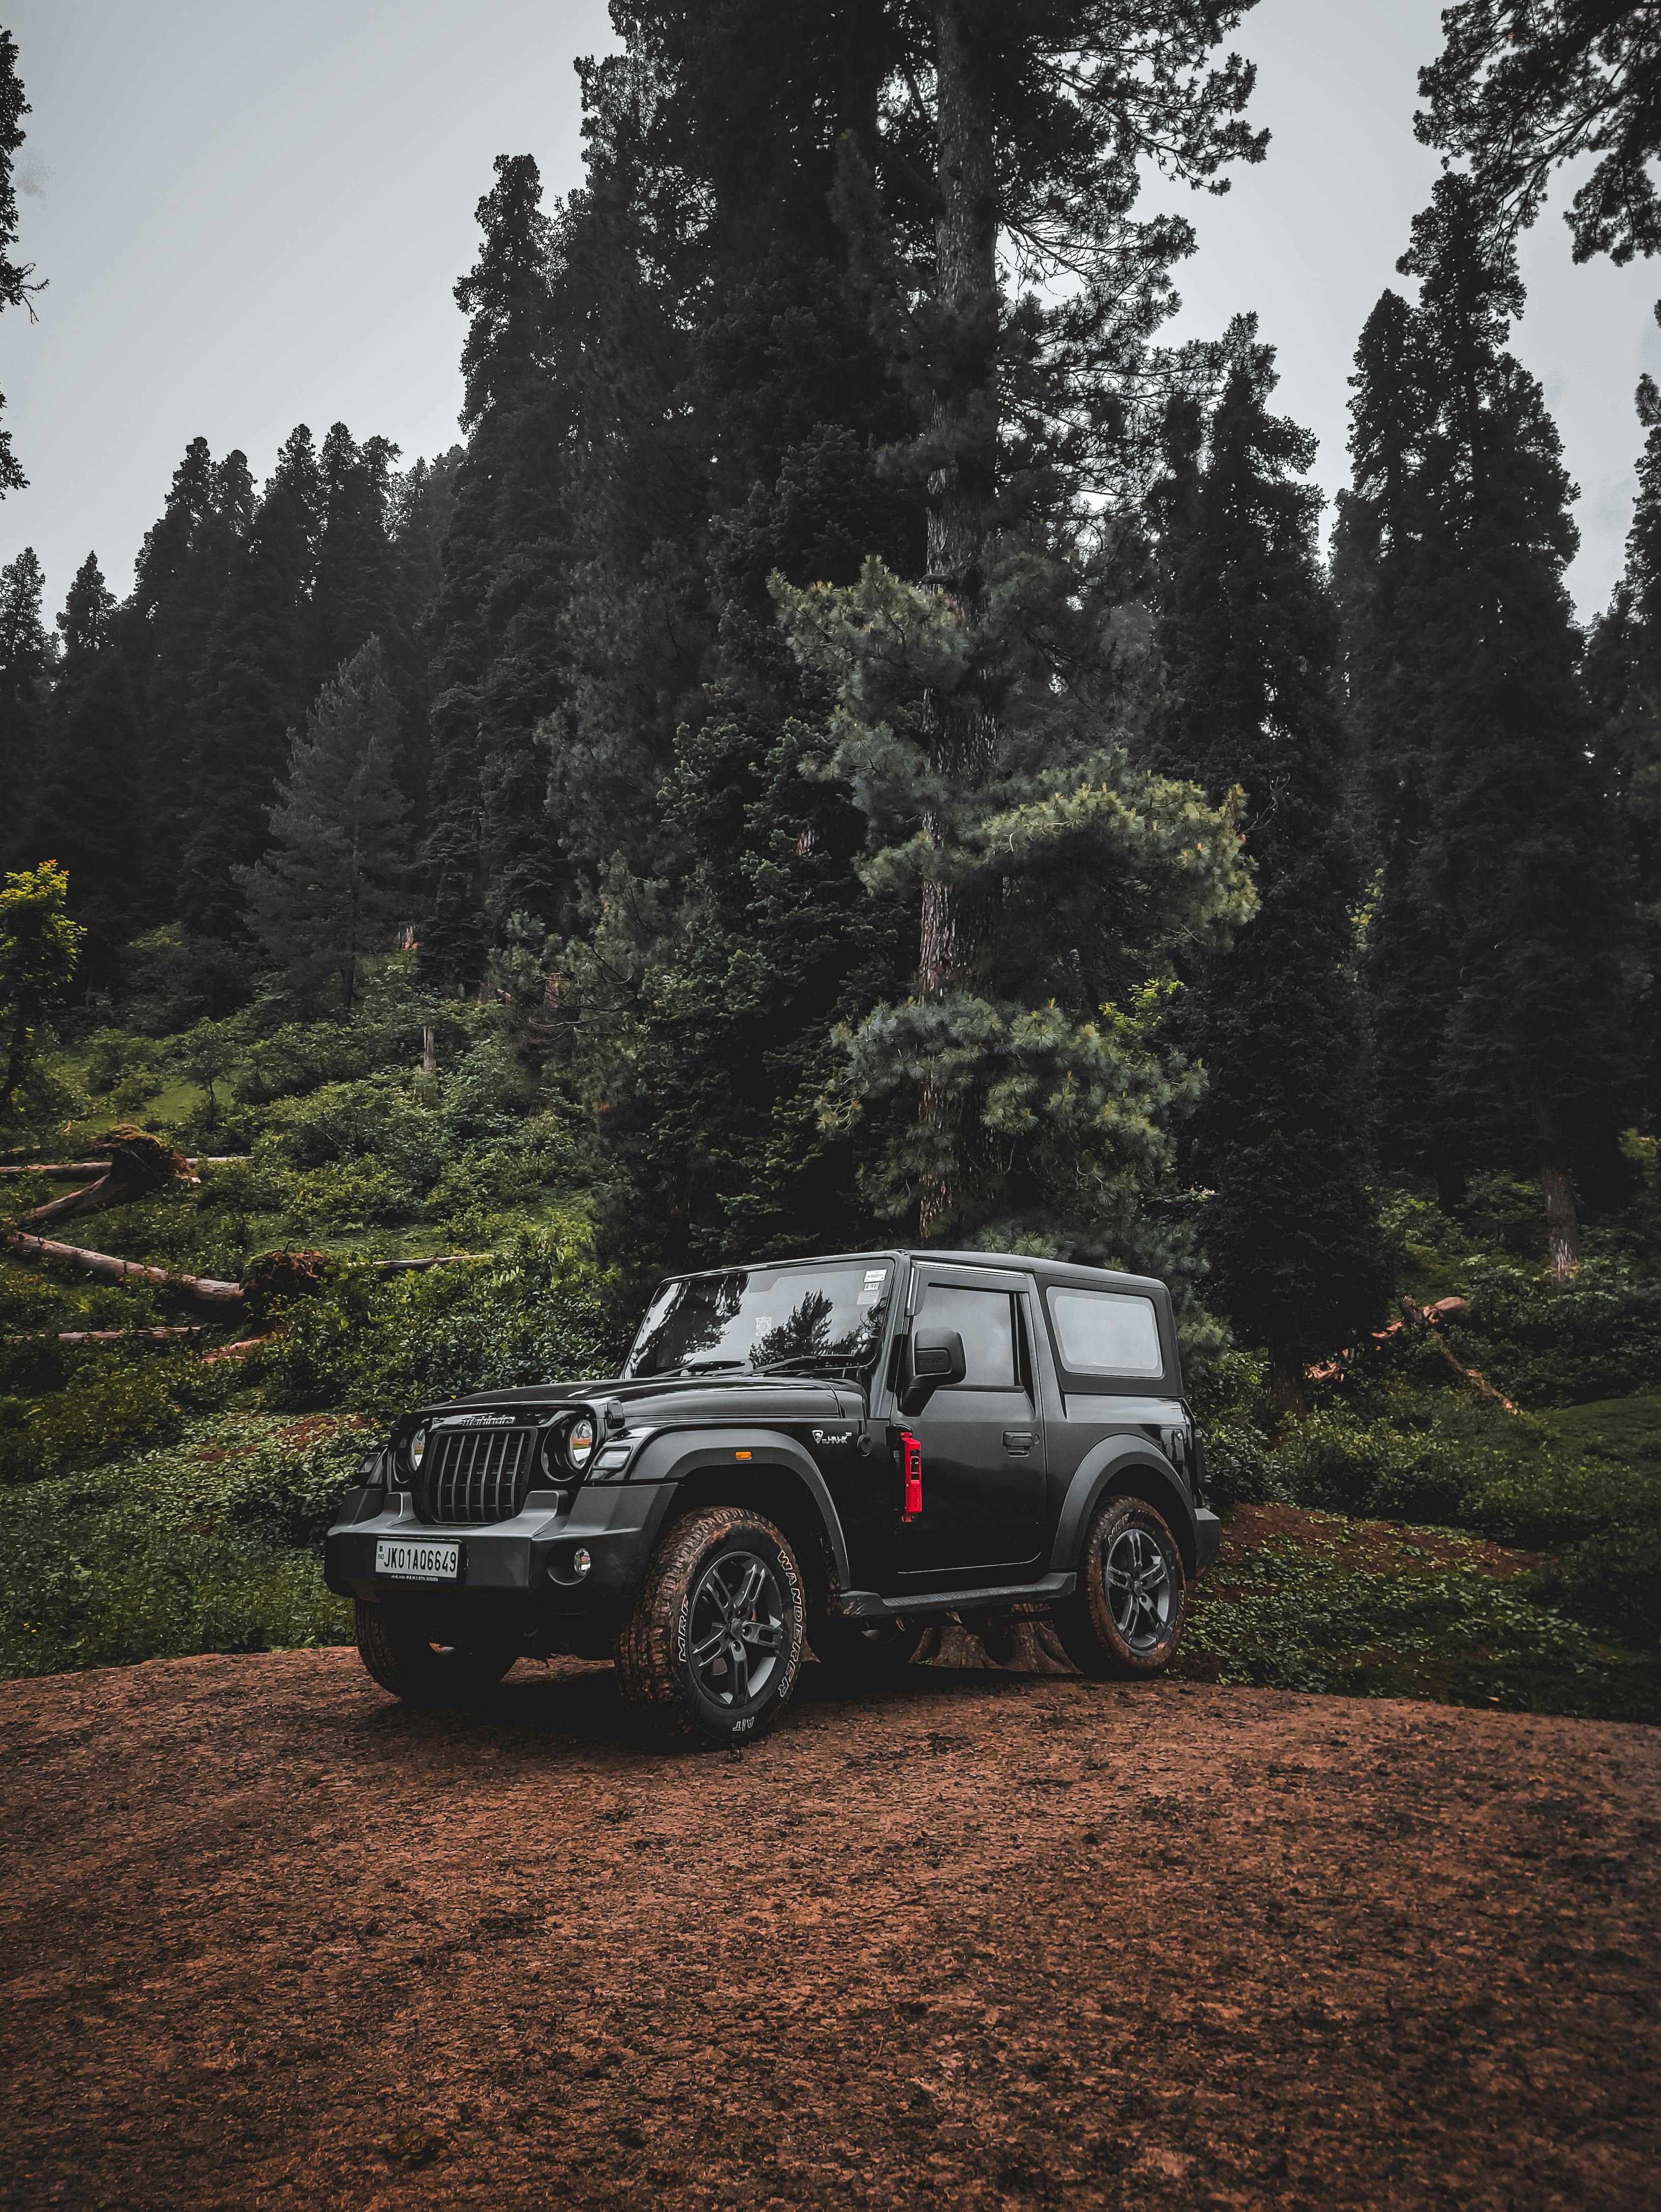 Black Jeep Wrangler on Dirt Road Surrounded by Green Trees · Free Stock  Photo